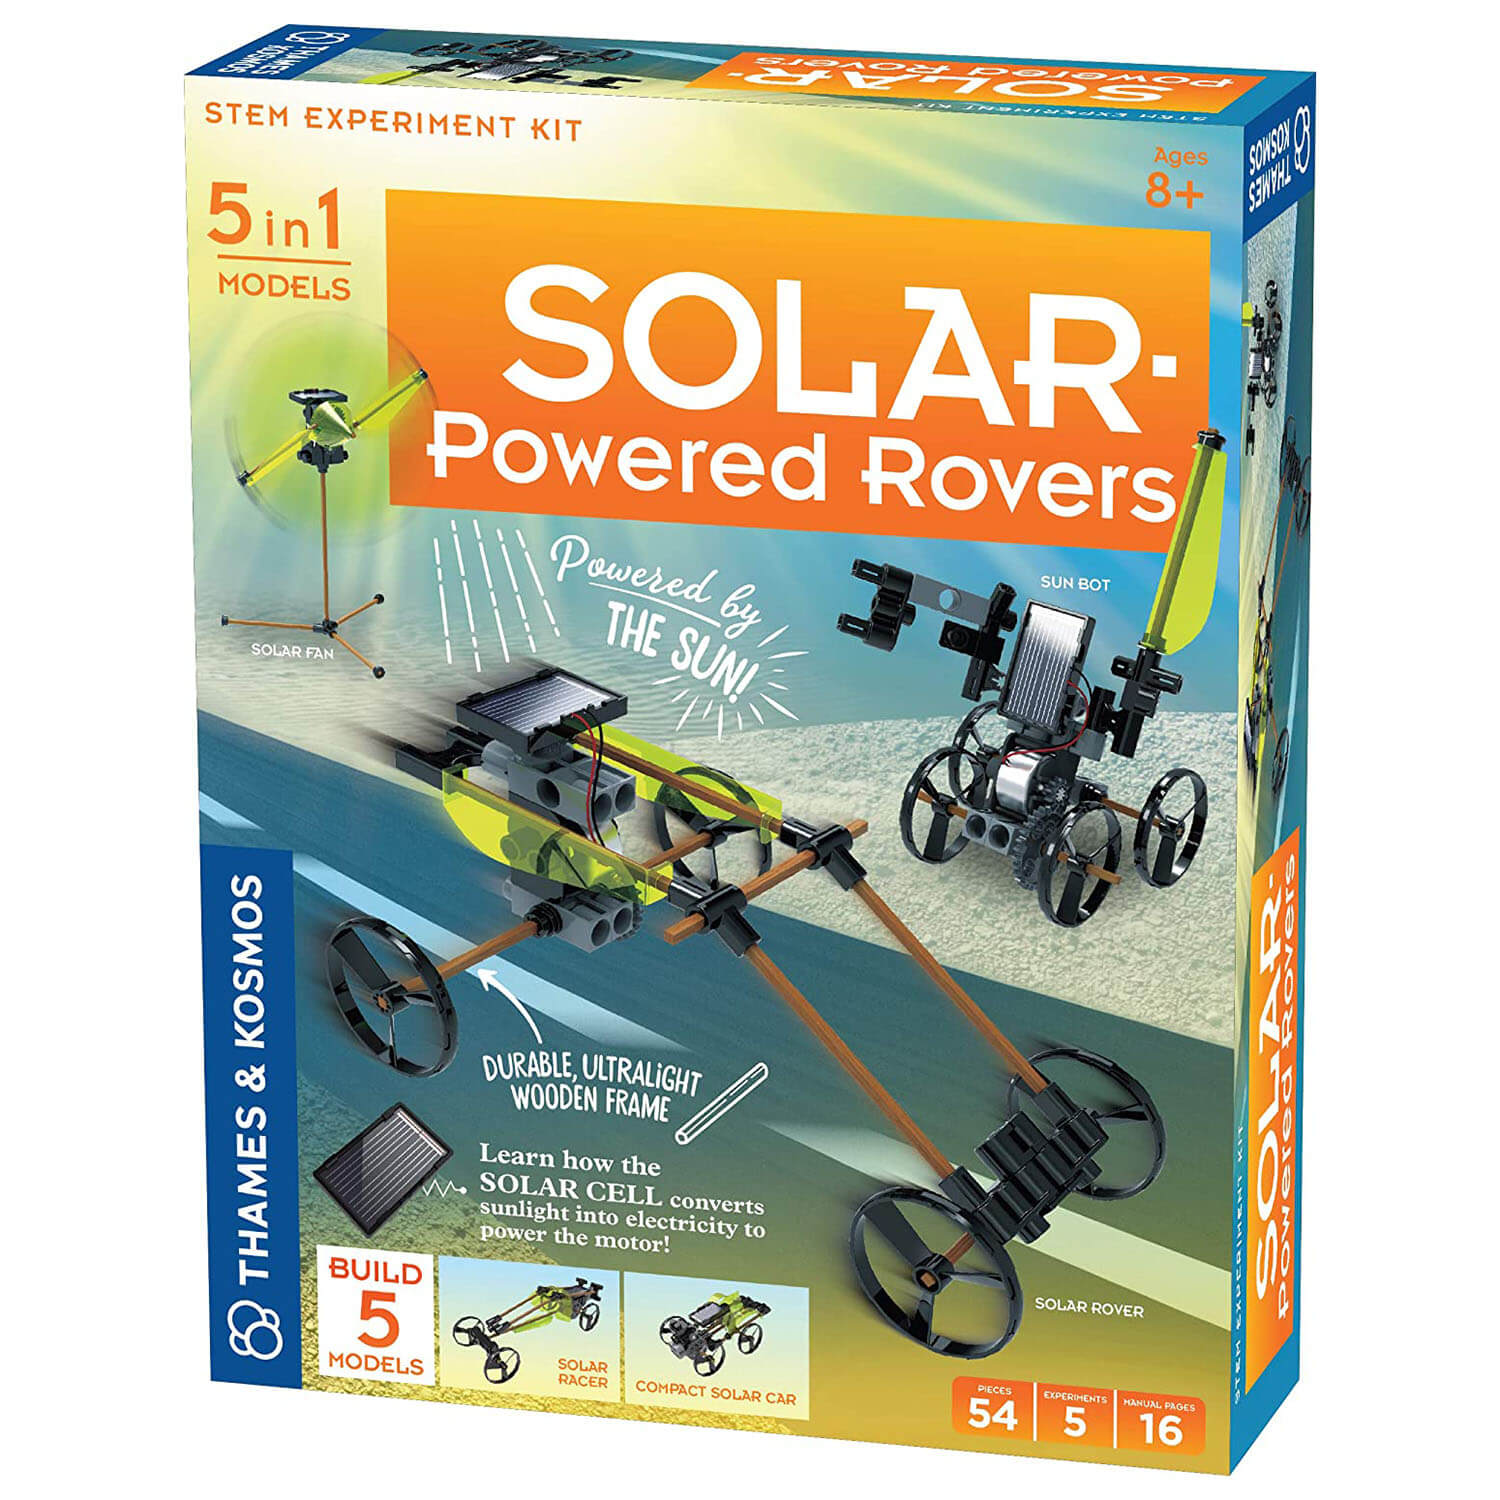 Thames and Kosmos Solar-Powered Rovers